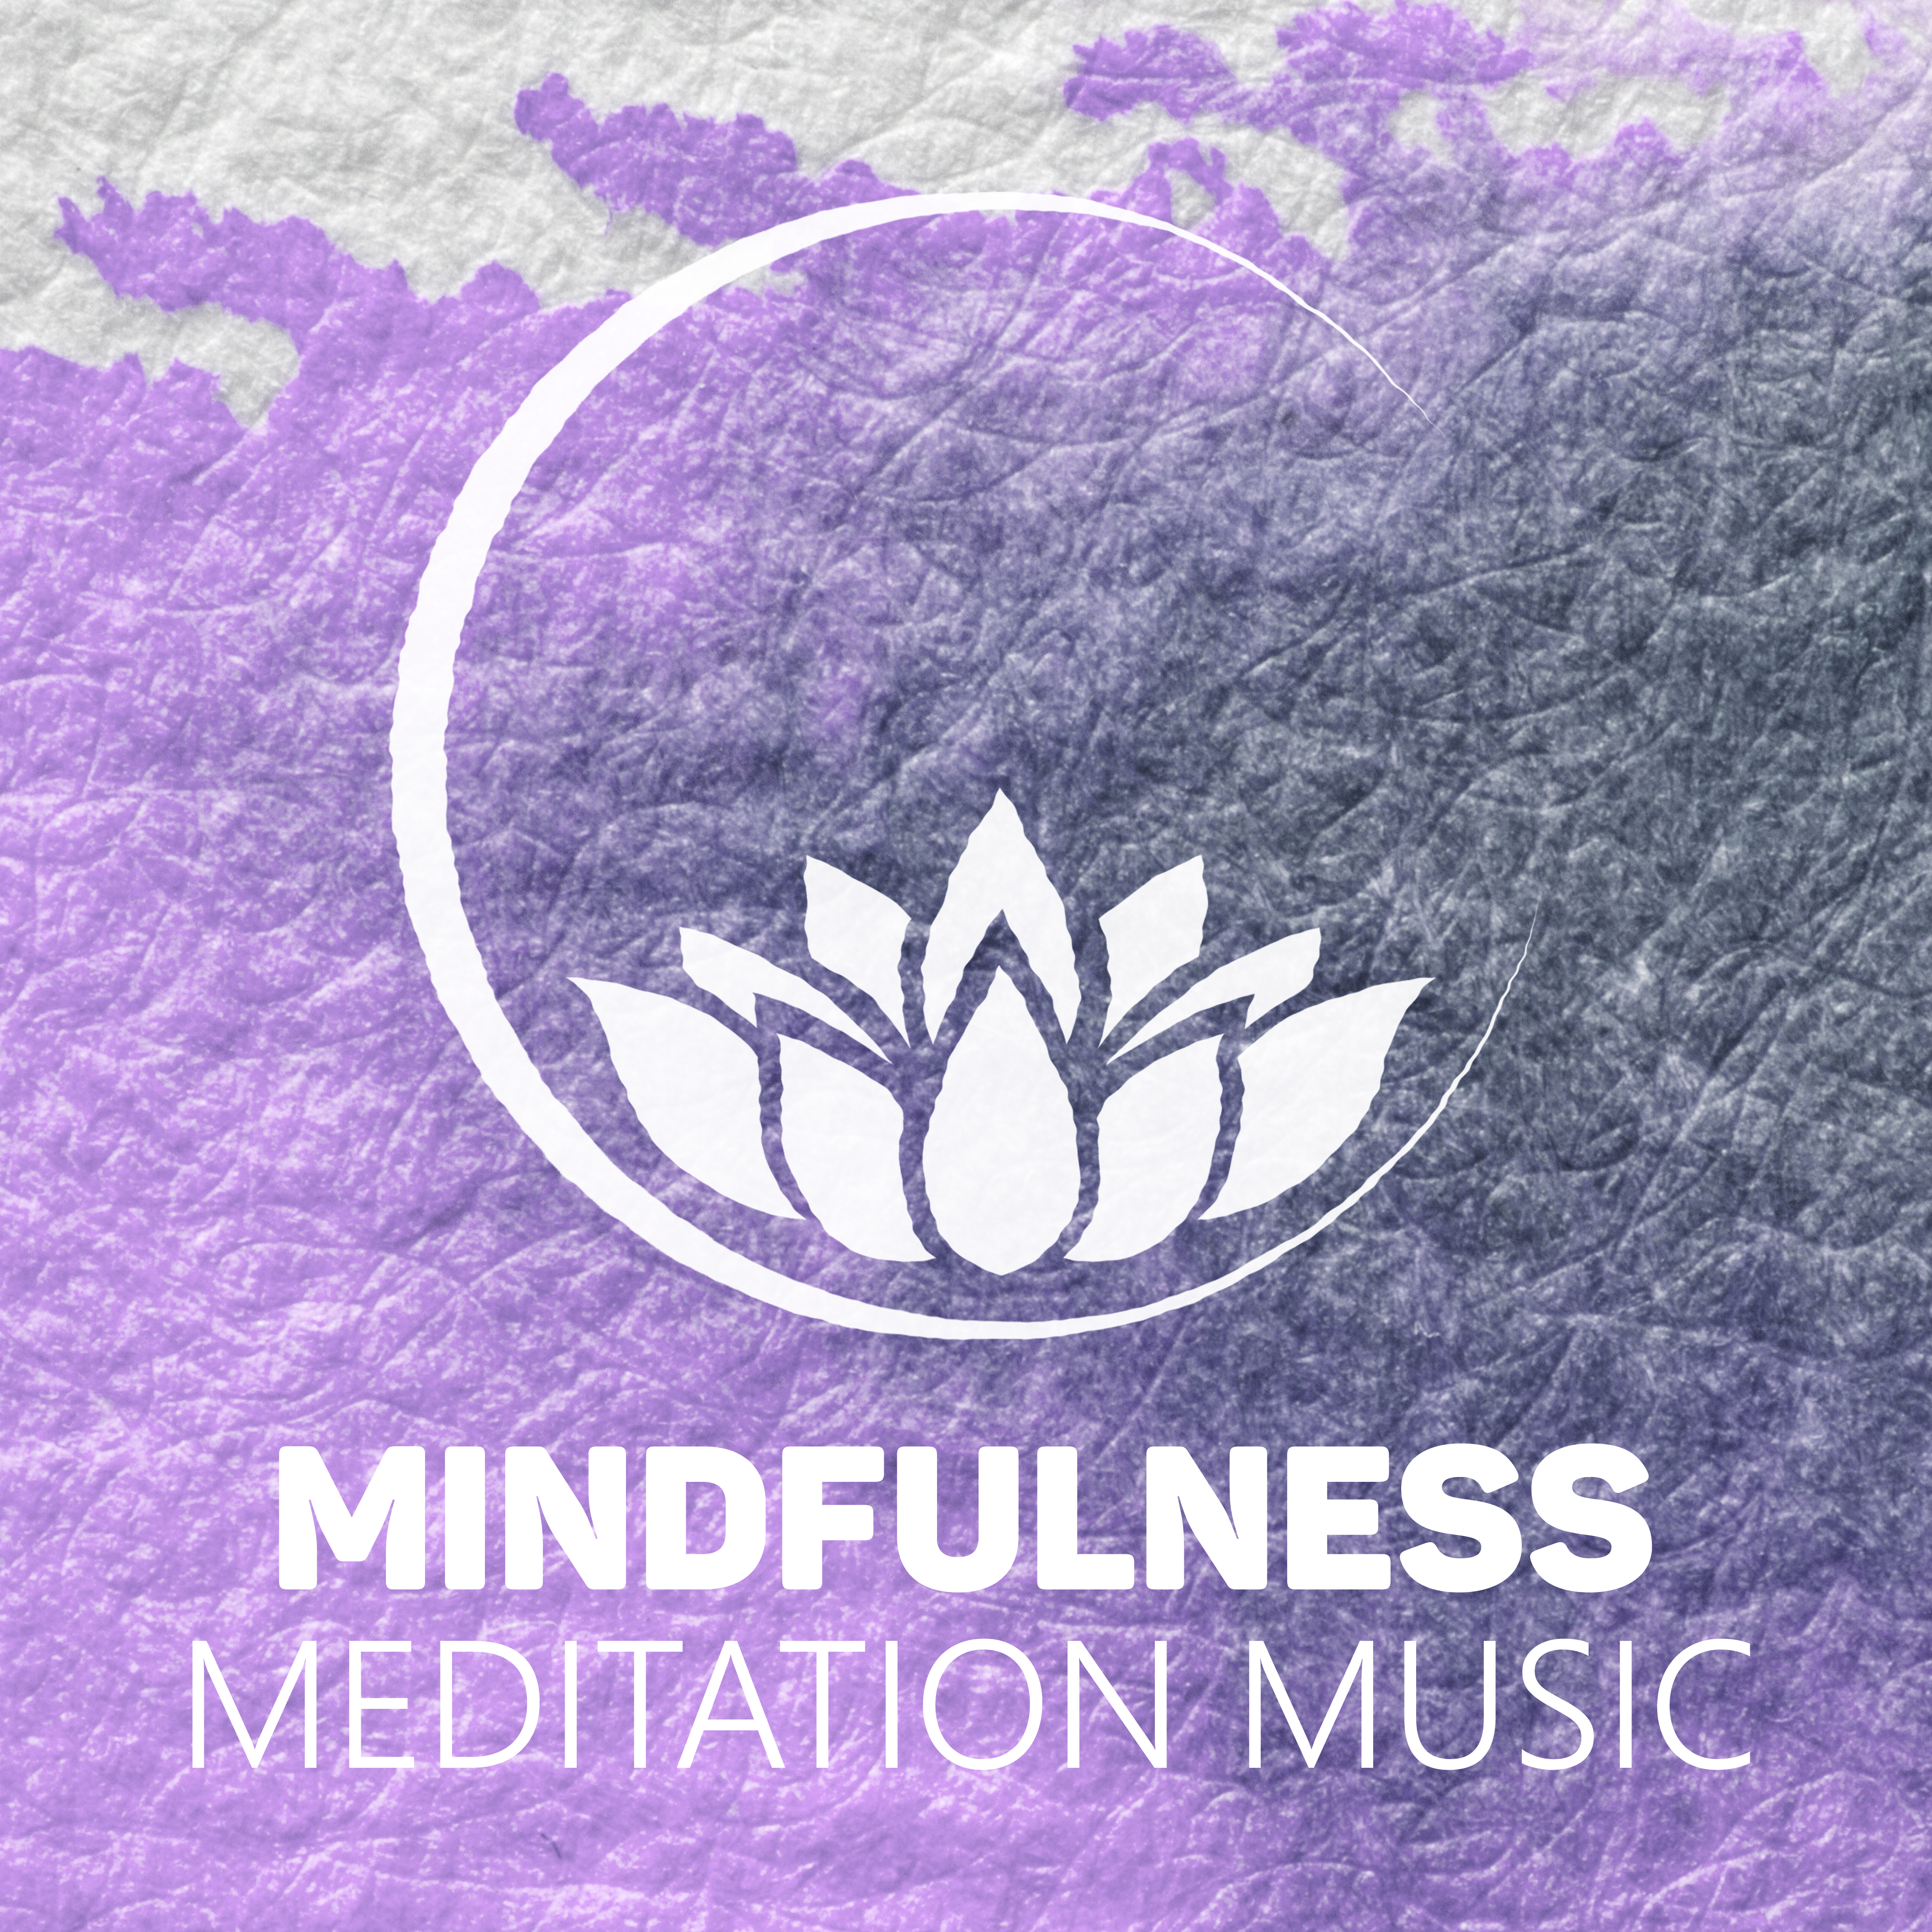 Mindfulness Meditation Music - Soothing Music, New Age, Healing Music, Peaceful Music, Sounds of Nature, Soothing Yoga, Spirituality, Calmness, Inner Peace